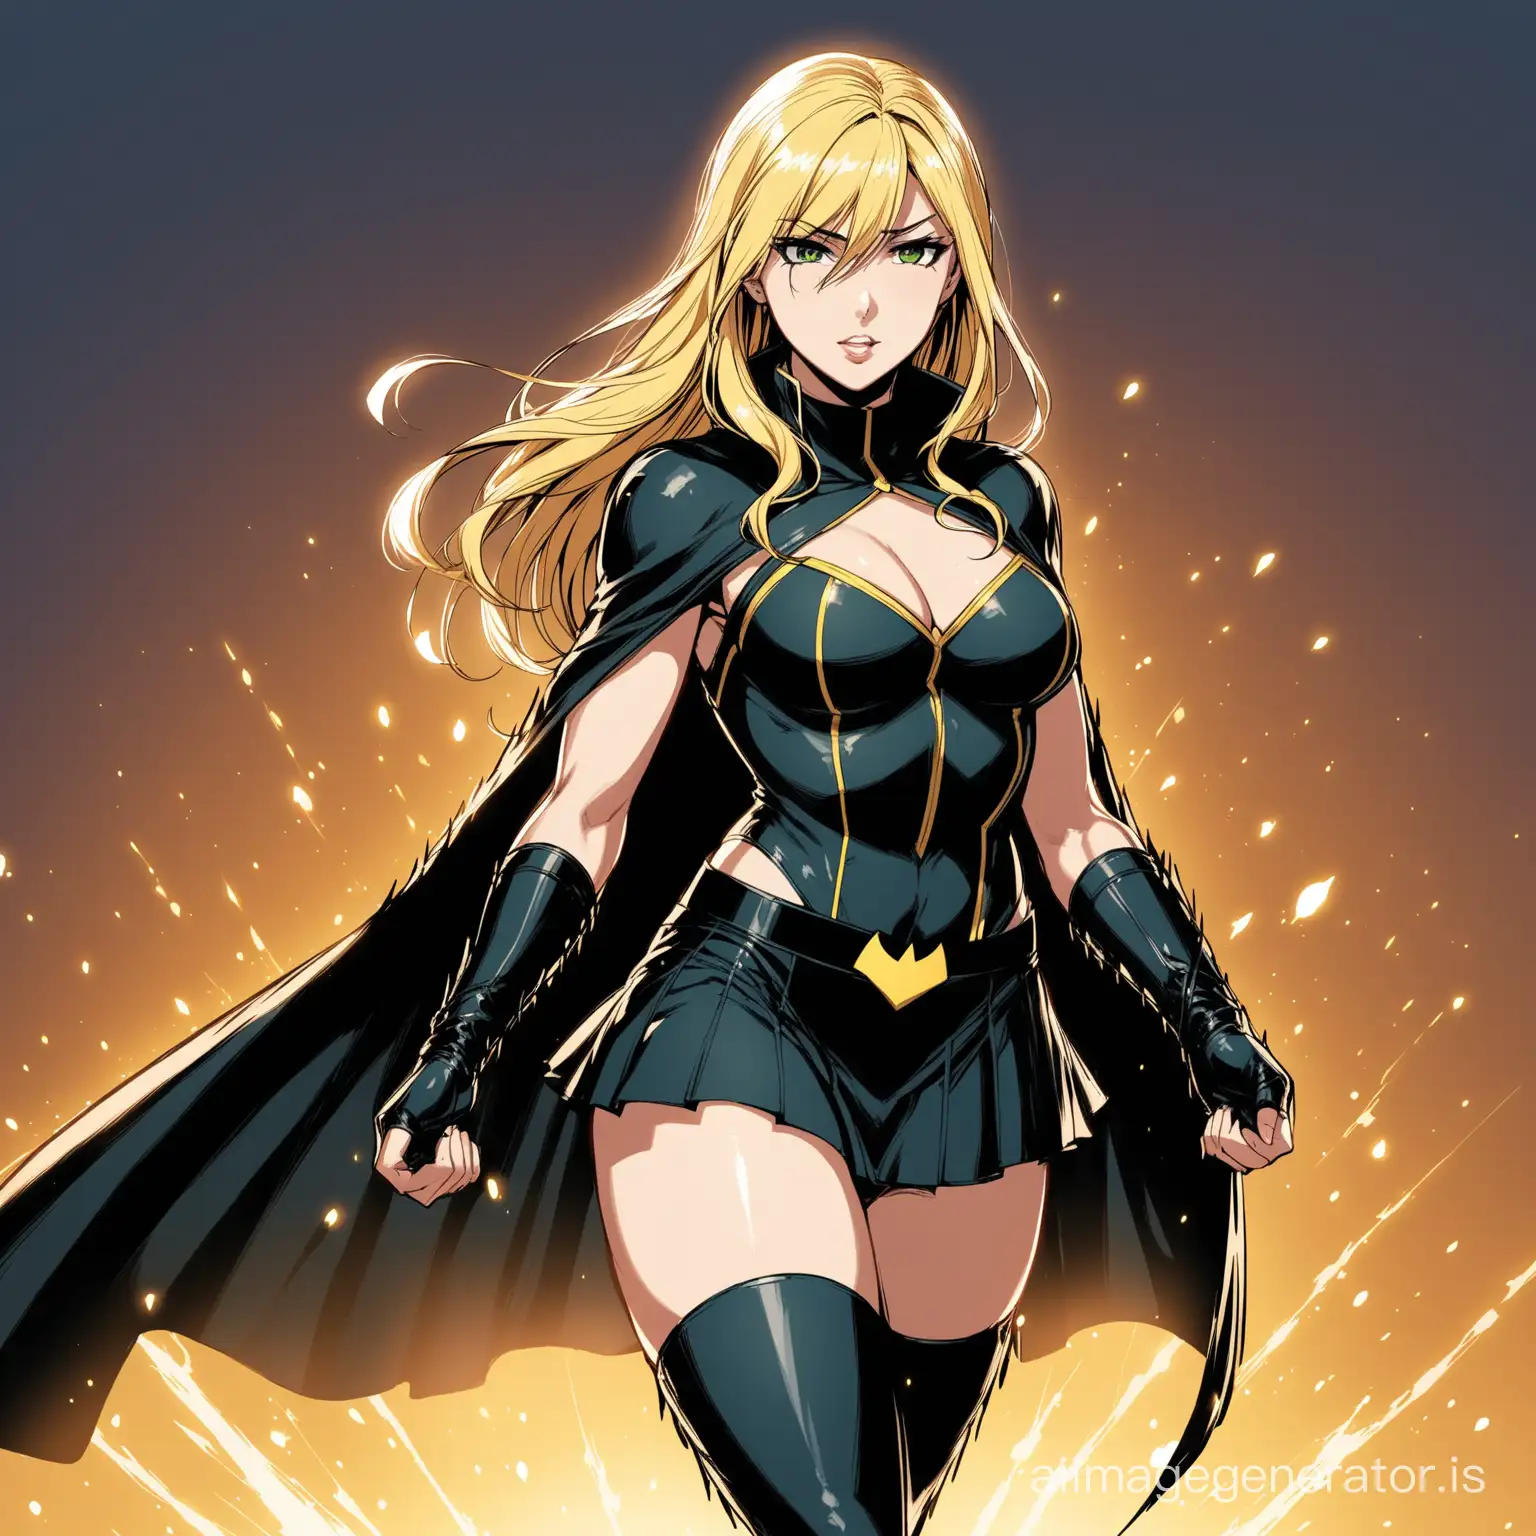 Seductive-Black-Canary-Cosplay-Sensual-Anime-Girl-in-Skimpy-Outfit-and-Cape